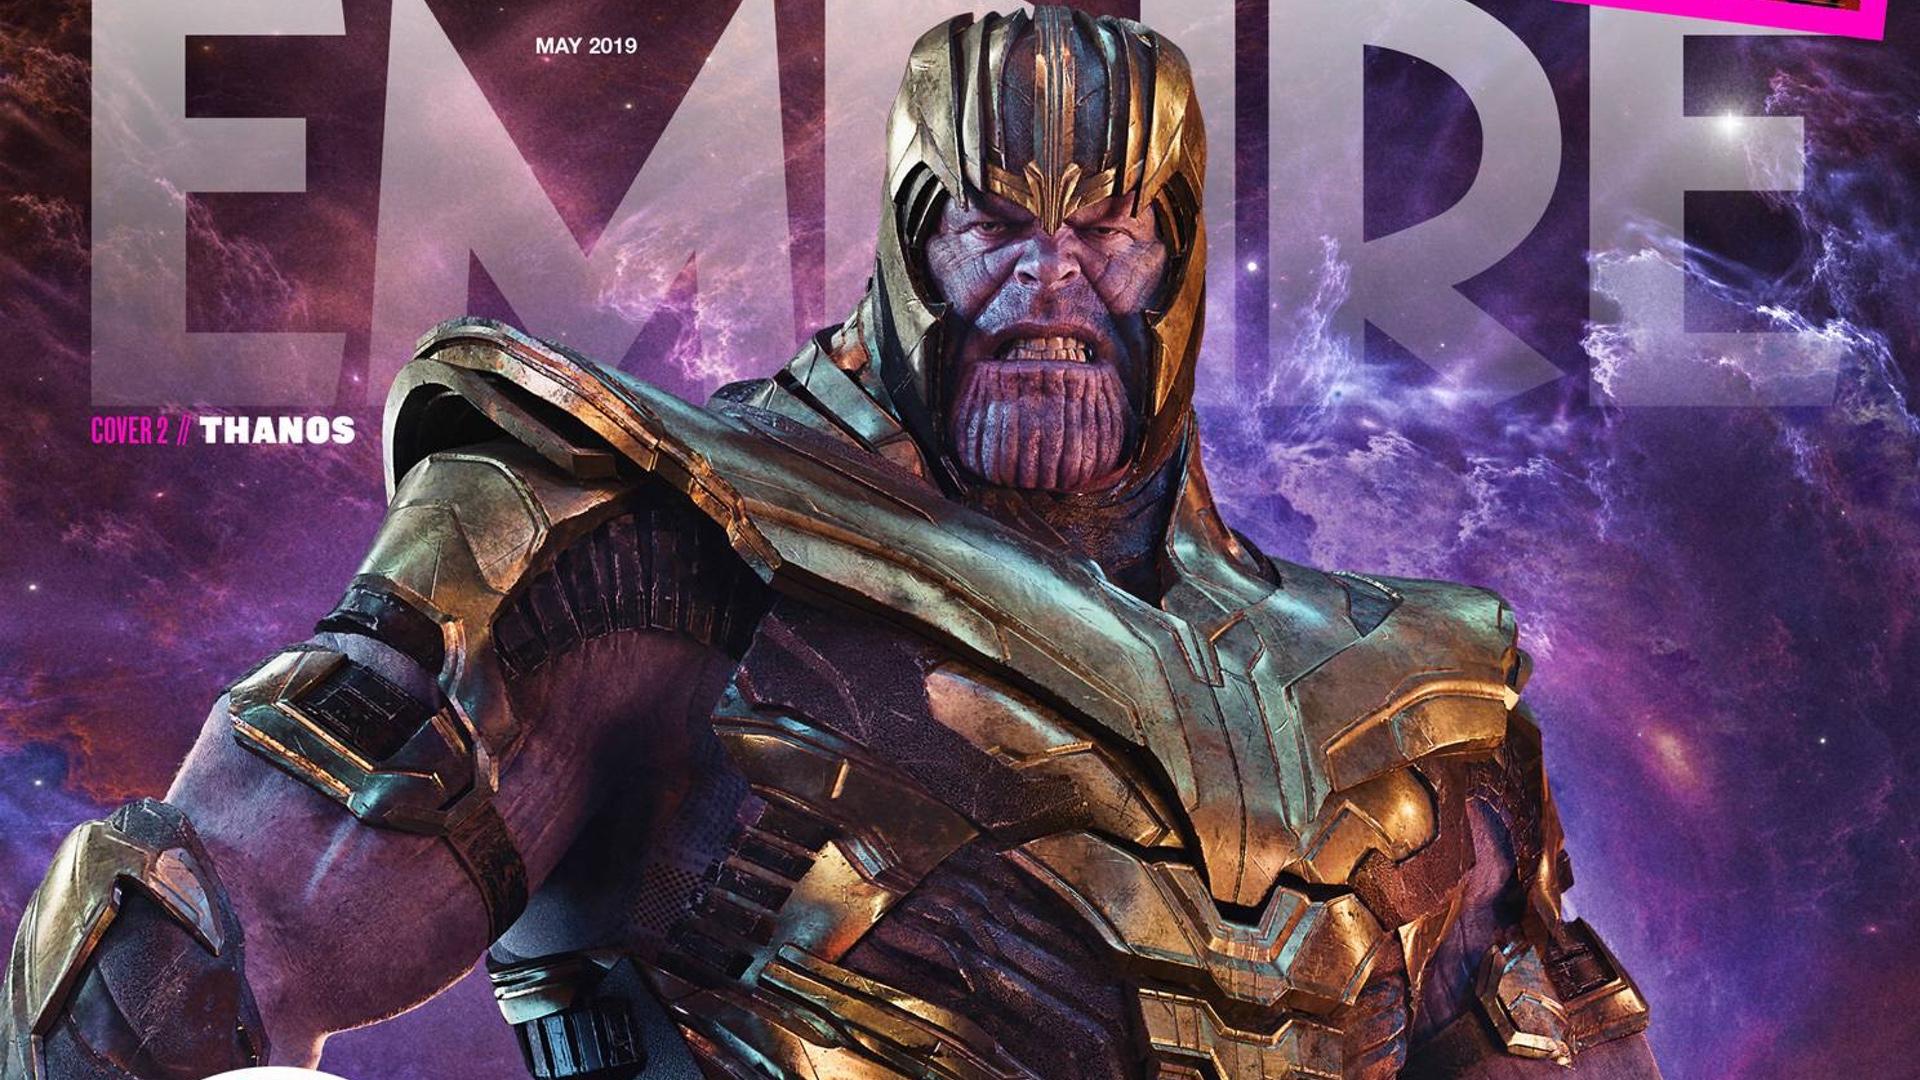 Thanos Graces The Cover of Empire in Full Armor For AVENGERS